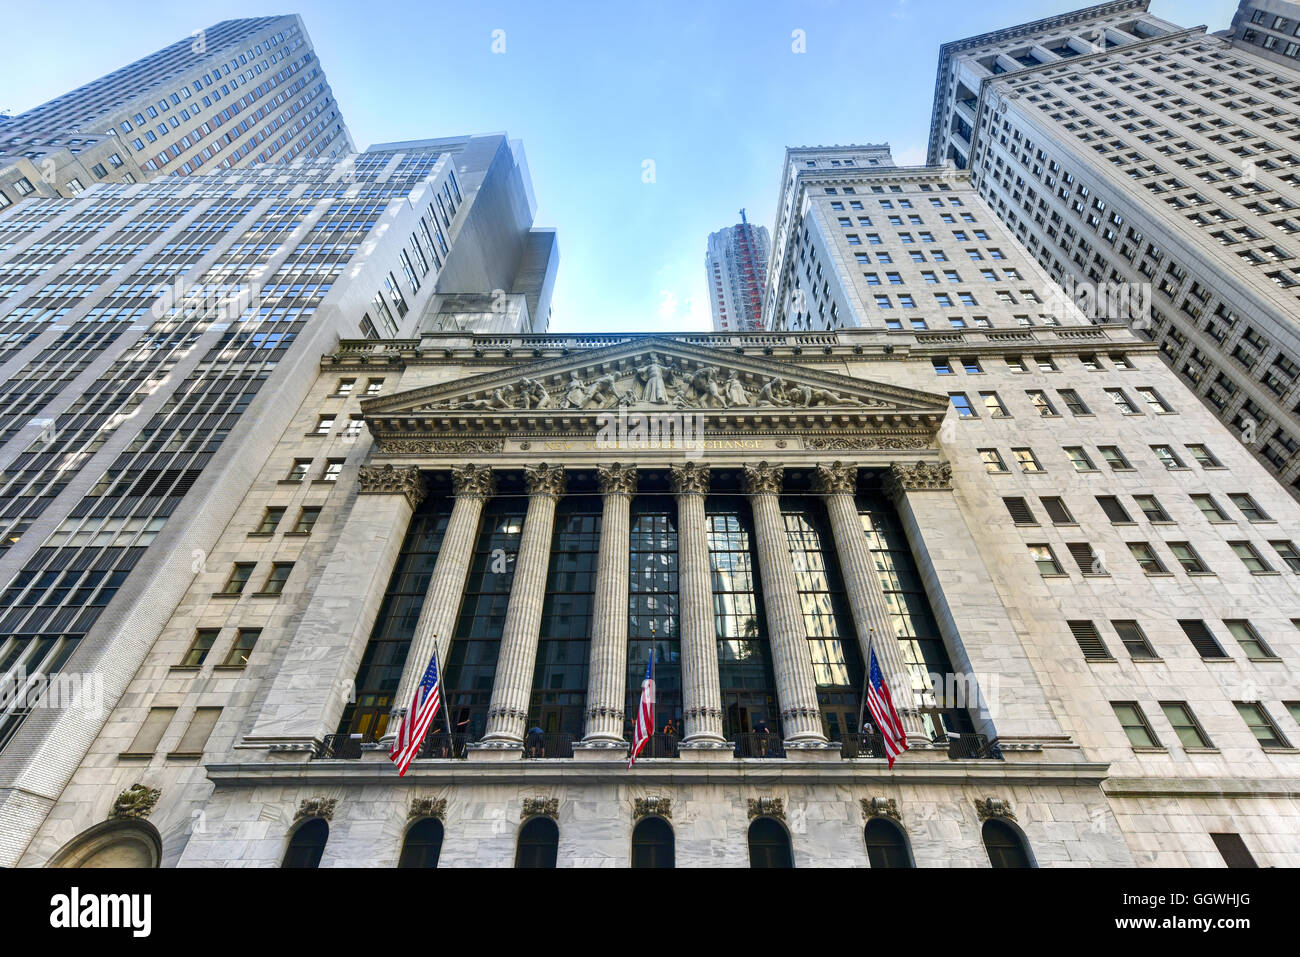 New York City - June 29, 2016: The historic New York Stock Exchange on Wall Street, one of the largest stock exchanges in the wo Stock Photo